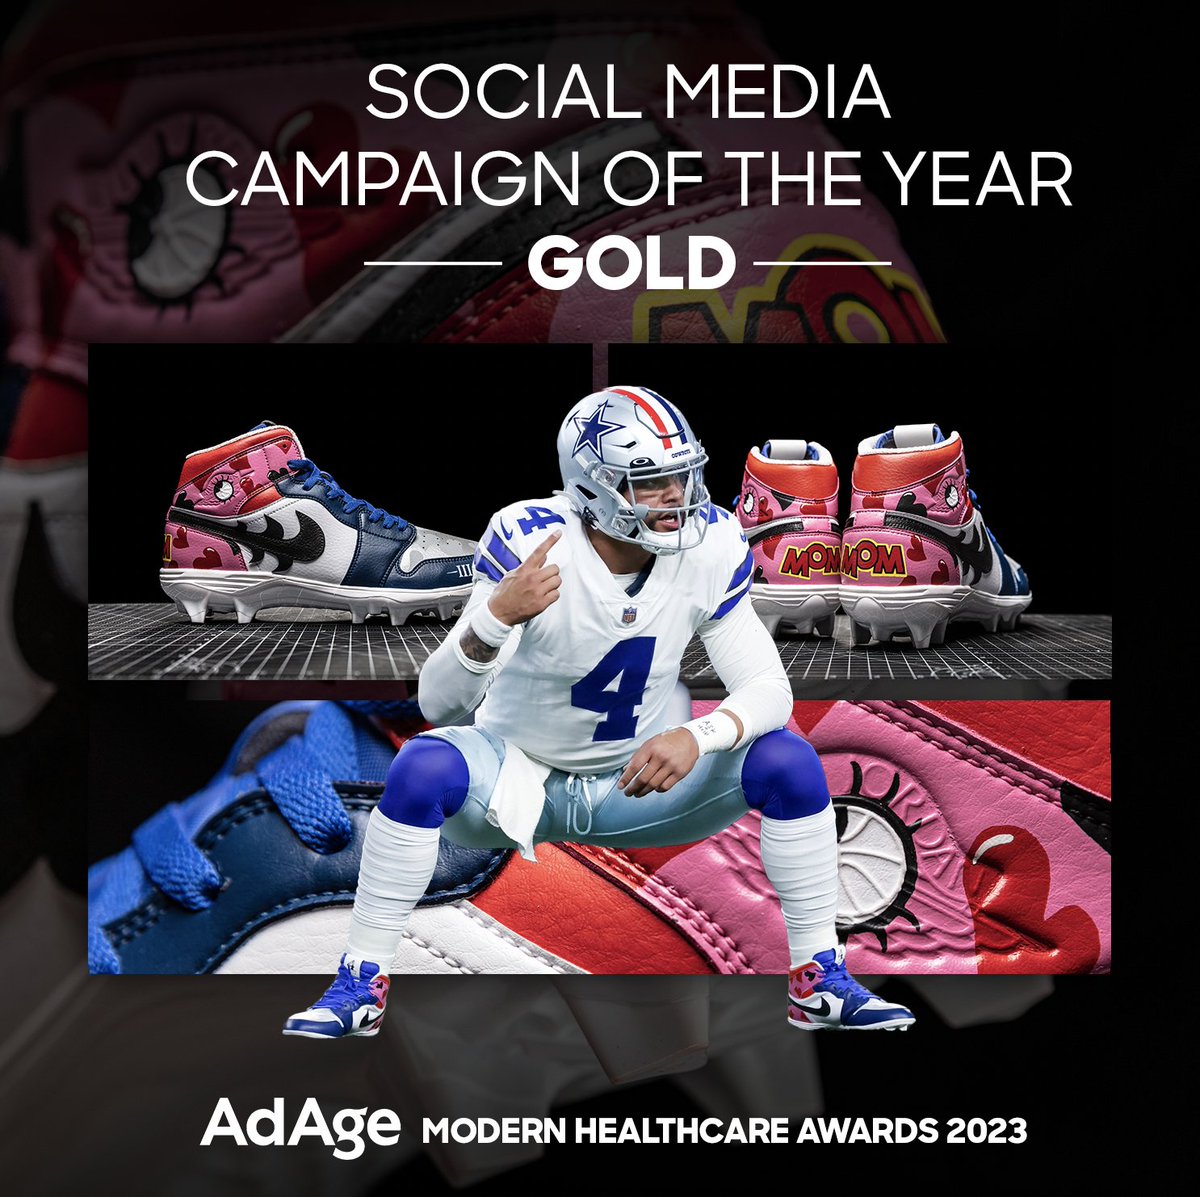 Proud to be recognized for Social Media Campaign of the Year for our work featuring @dallascowboys @dak @bswhealth @jwdanklefs 🎞️ @CUTango #cowboysnation #faithfightfinish #sportsmarketing #healthcaremarketing #socialmediaadvertising #influencermarketing #dallasadvertising